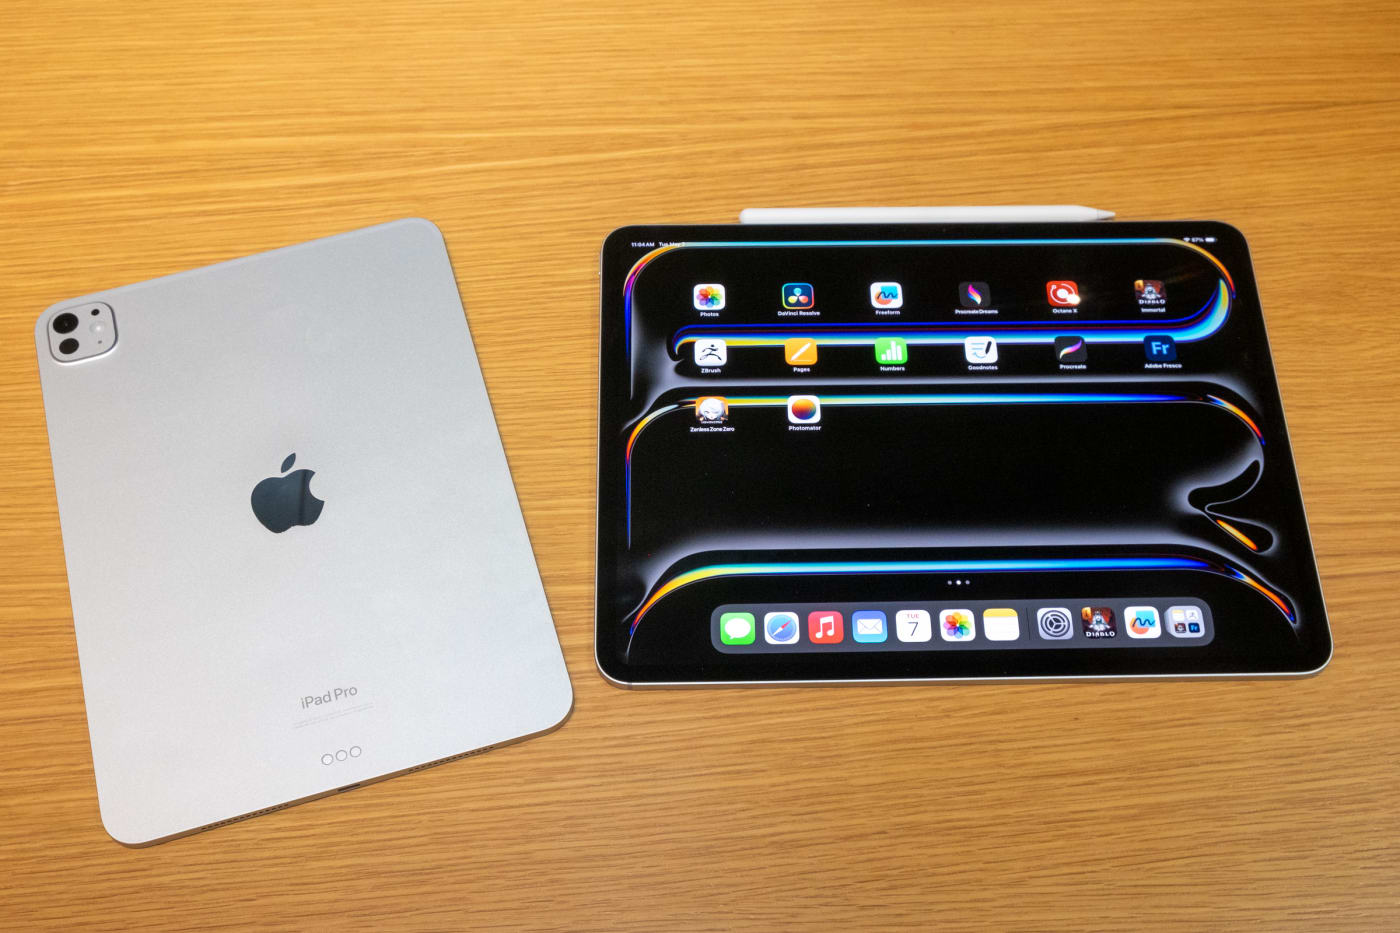 iPad Pro M4 hands-on: Absurdly thin and light, but the screen steals the show